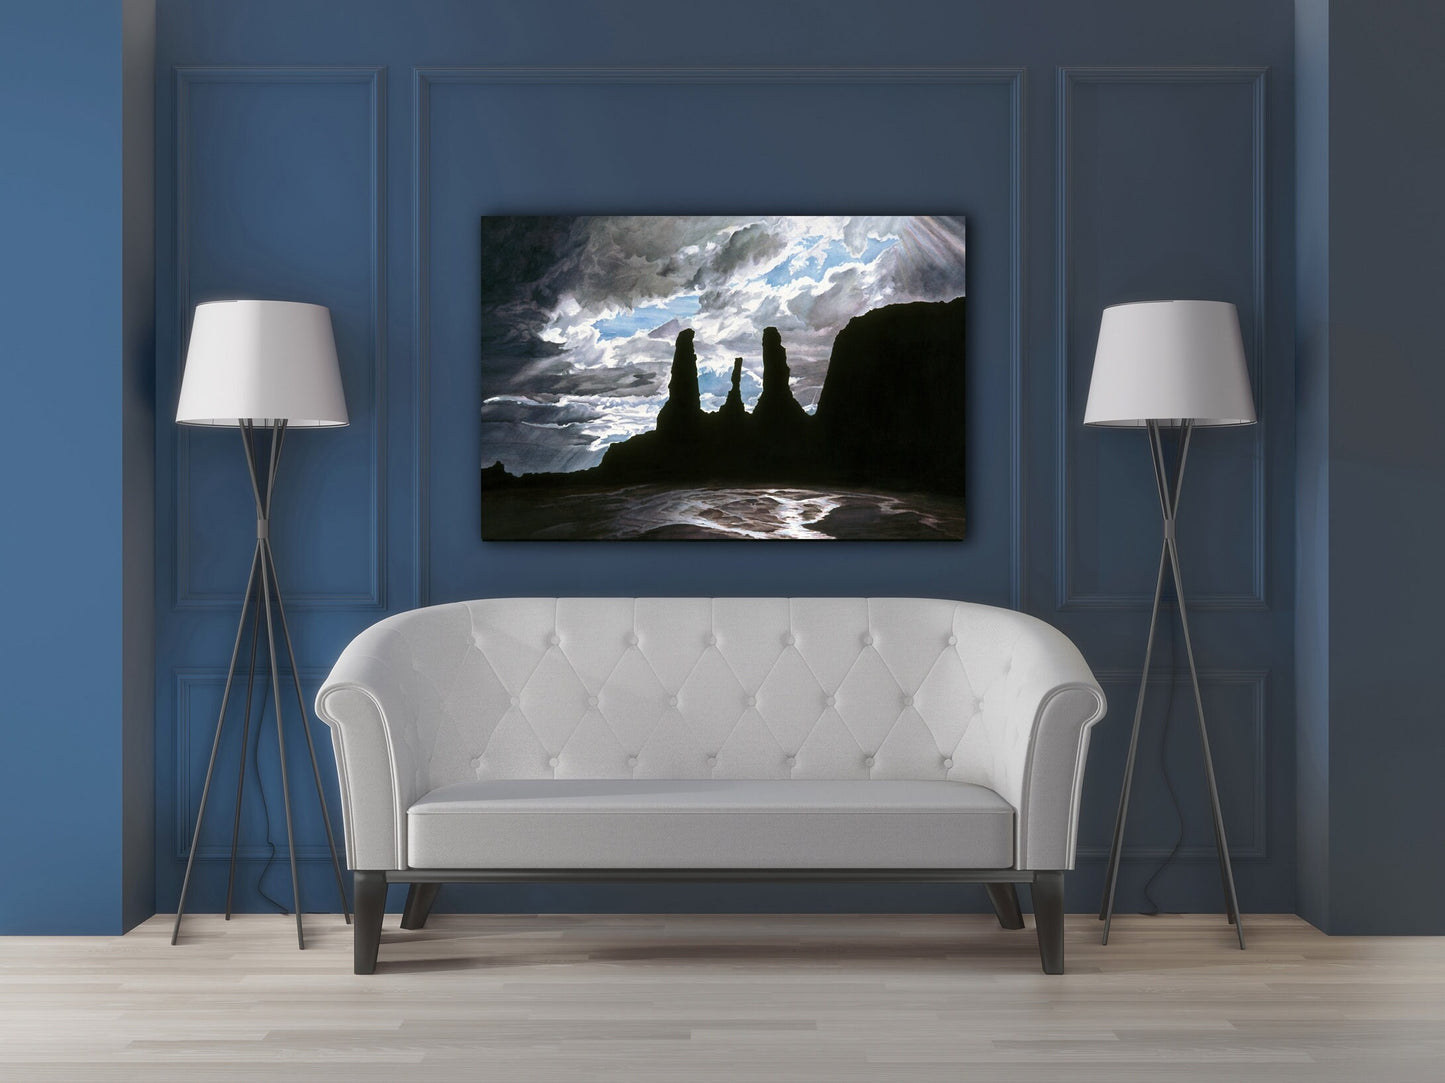 Large Canvas Art, Travel Poster, Monument Valley, Oversized Framed Wall Art, Landscape Painting